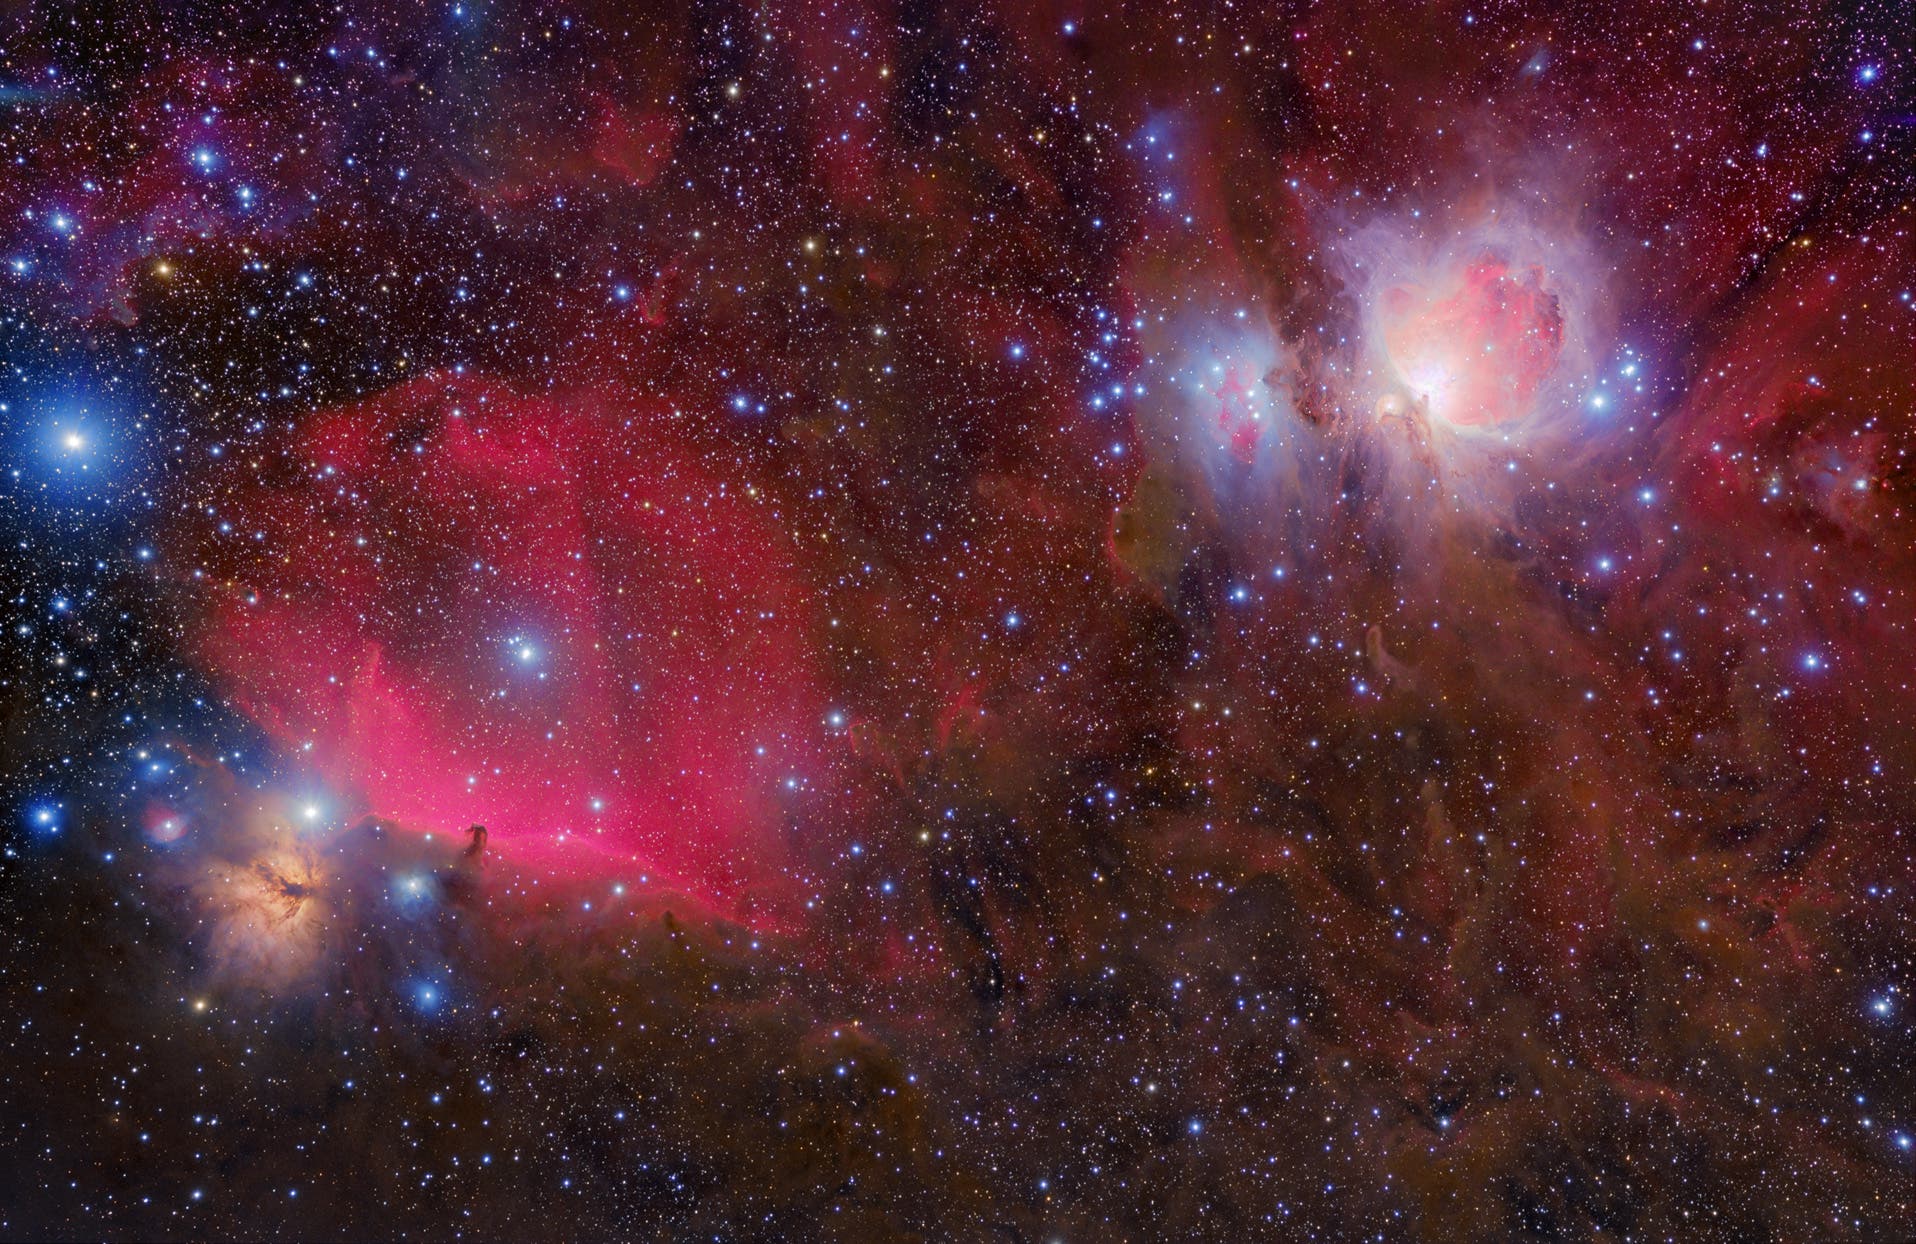 Orion - Flame, Horsehead and Great Nebula